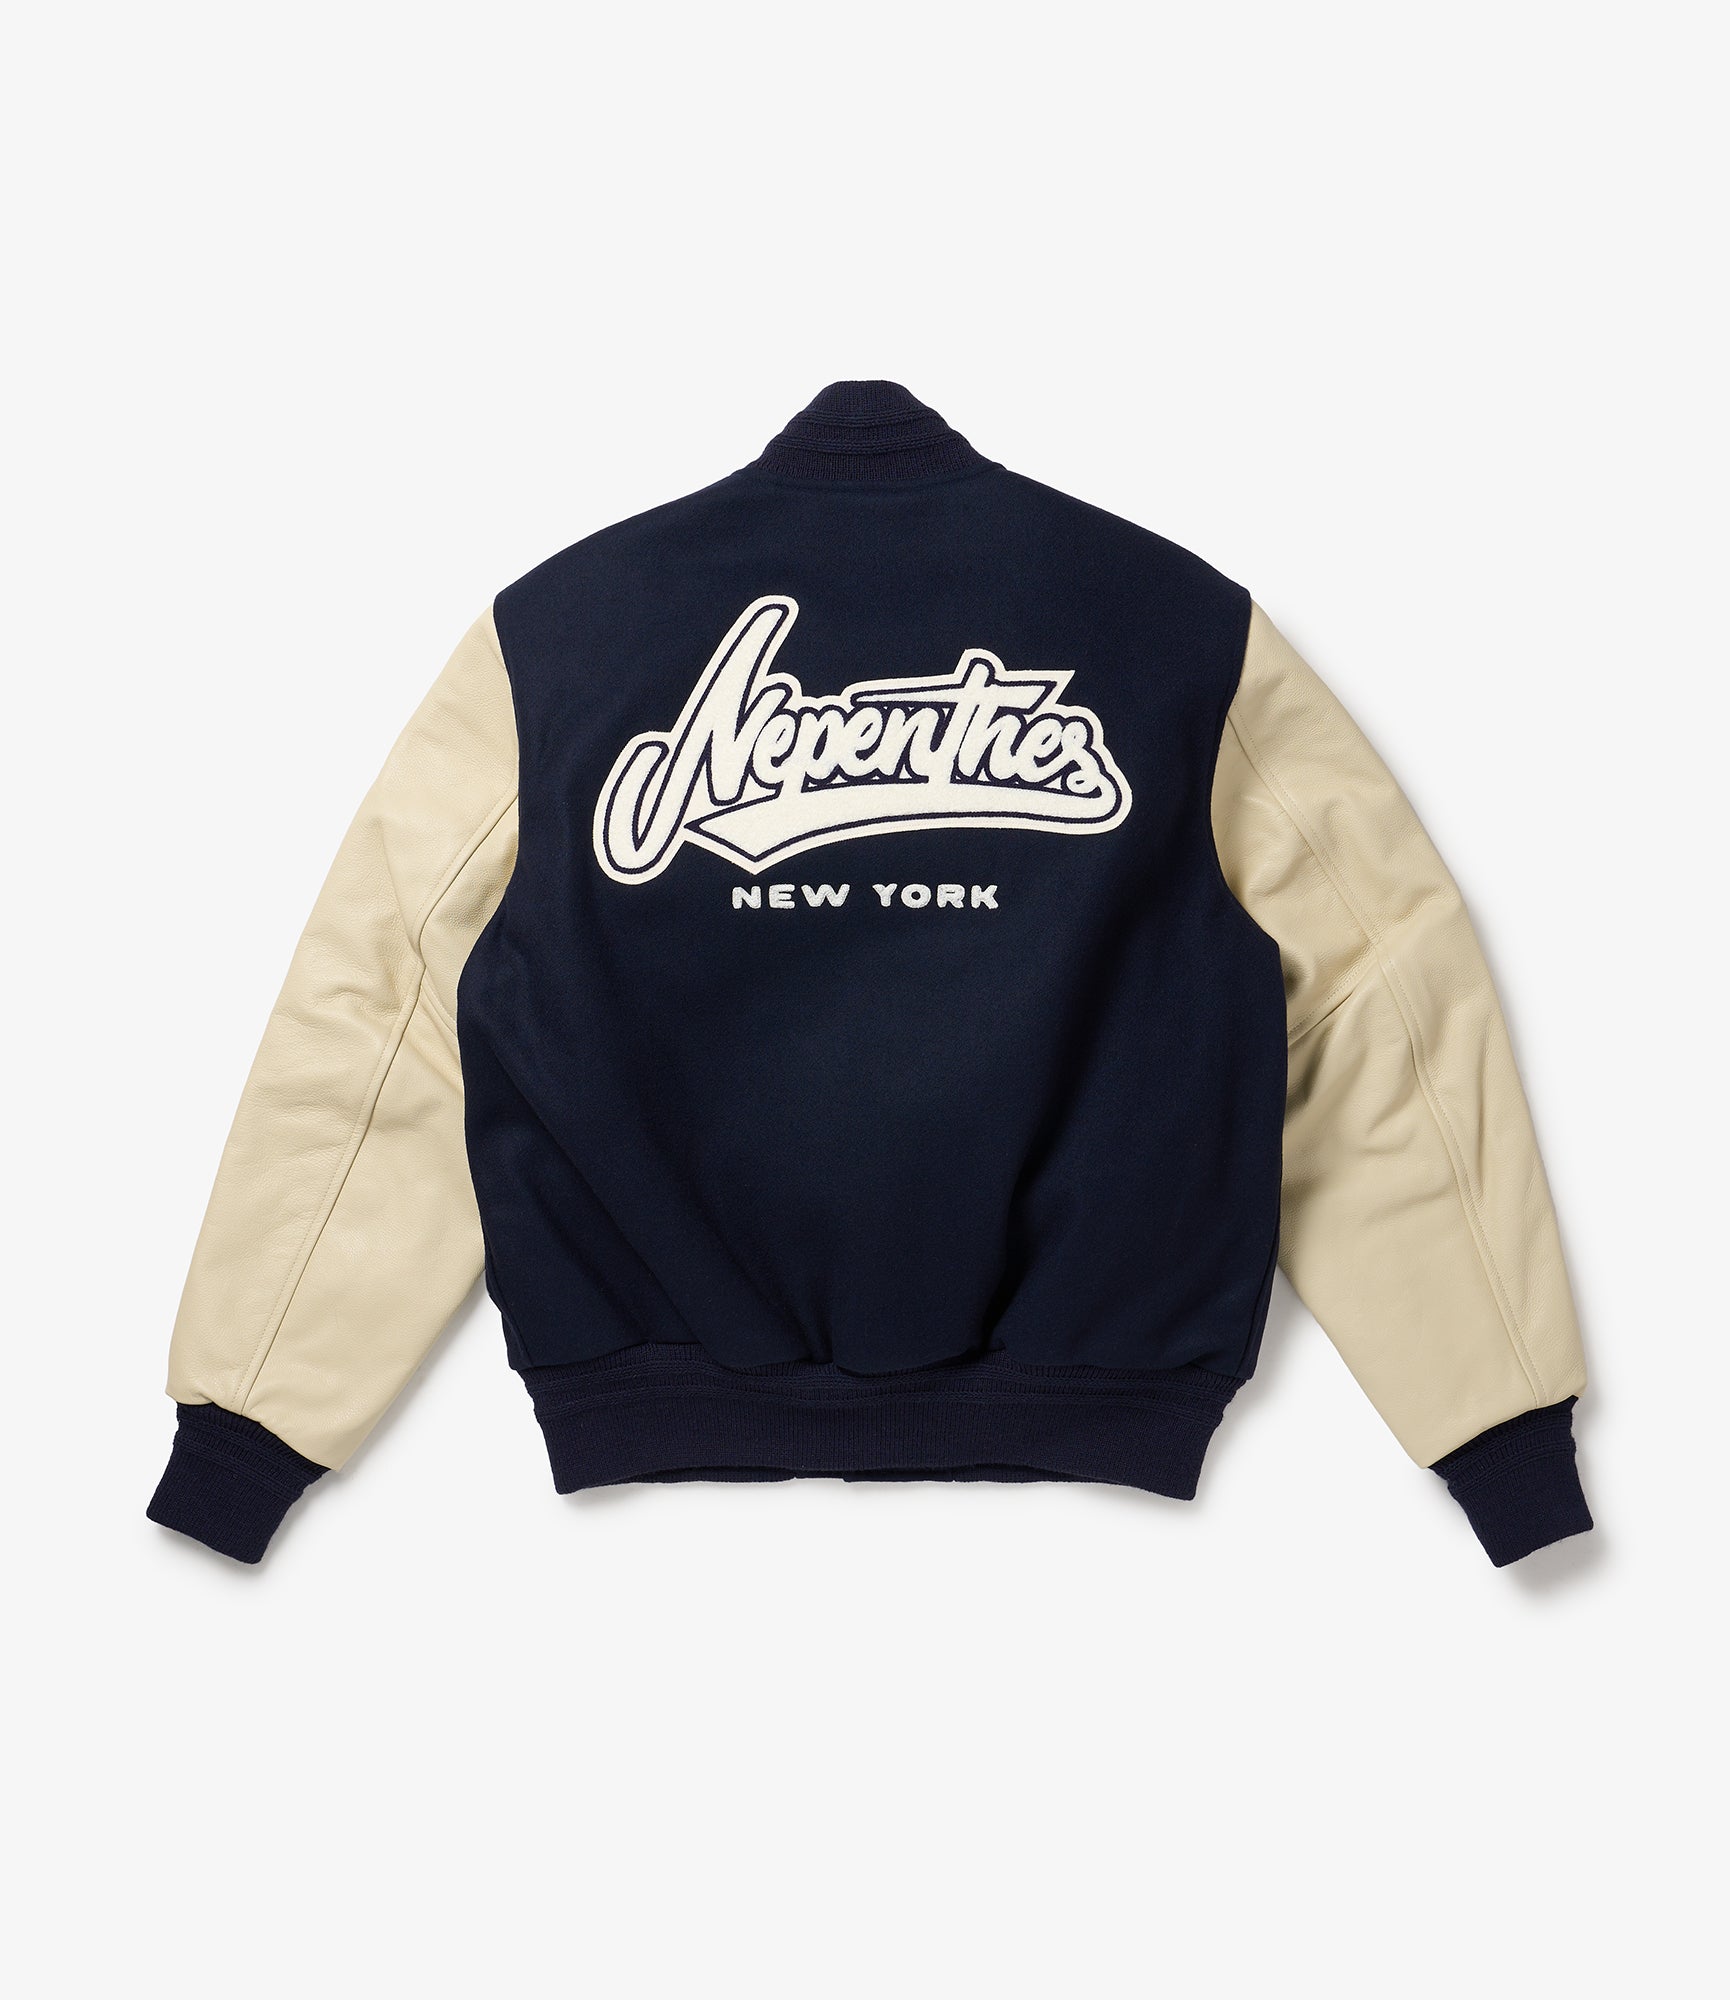 Outerwear | Nepenthes New York